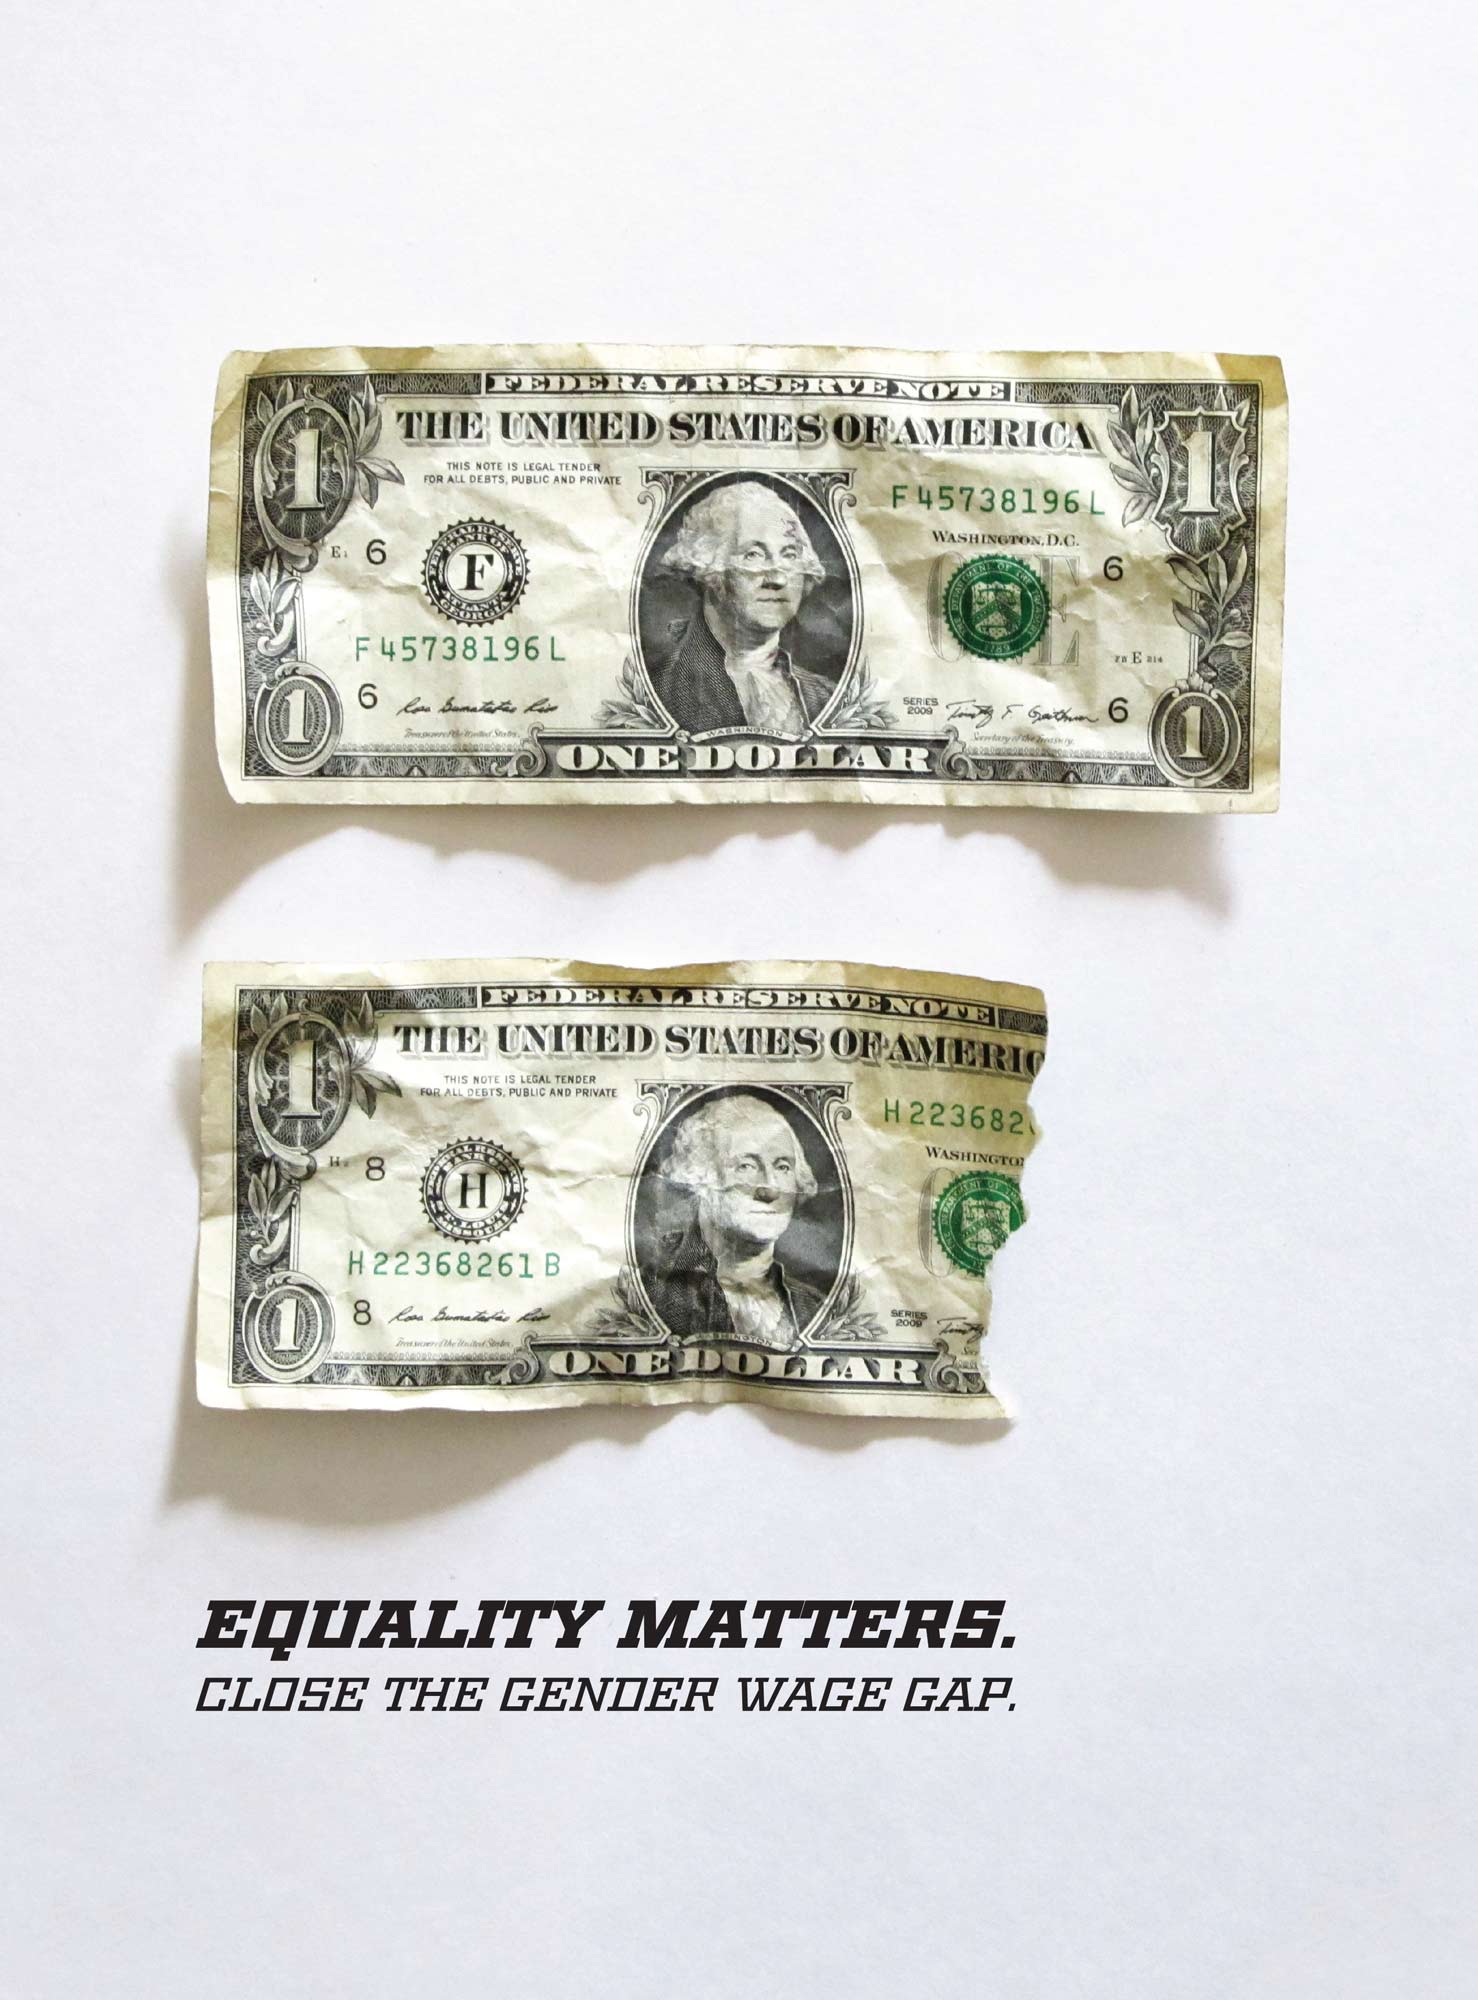 “I come from a family of strong, hard-working women, so the gender wage gap is an issue that’s close to my heart. For my poster, I wanted to subvert a universally recognized symbol (the equals sign) to make a comment about the unfairness of the gender wage gap.”